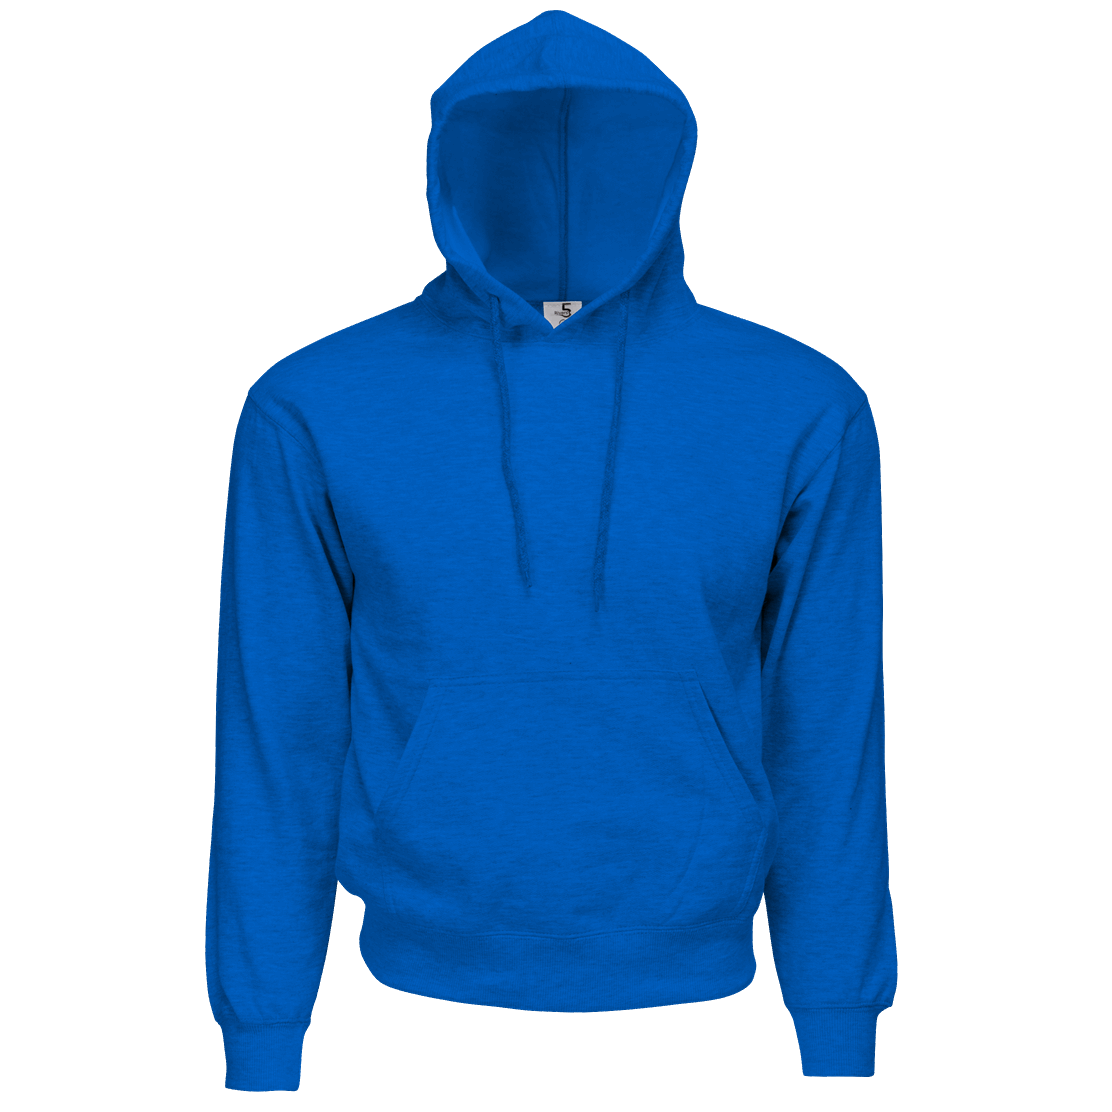 Jacket clipart blue hoodie, Picture #1426551 jacket clipart blue hoodie